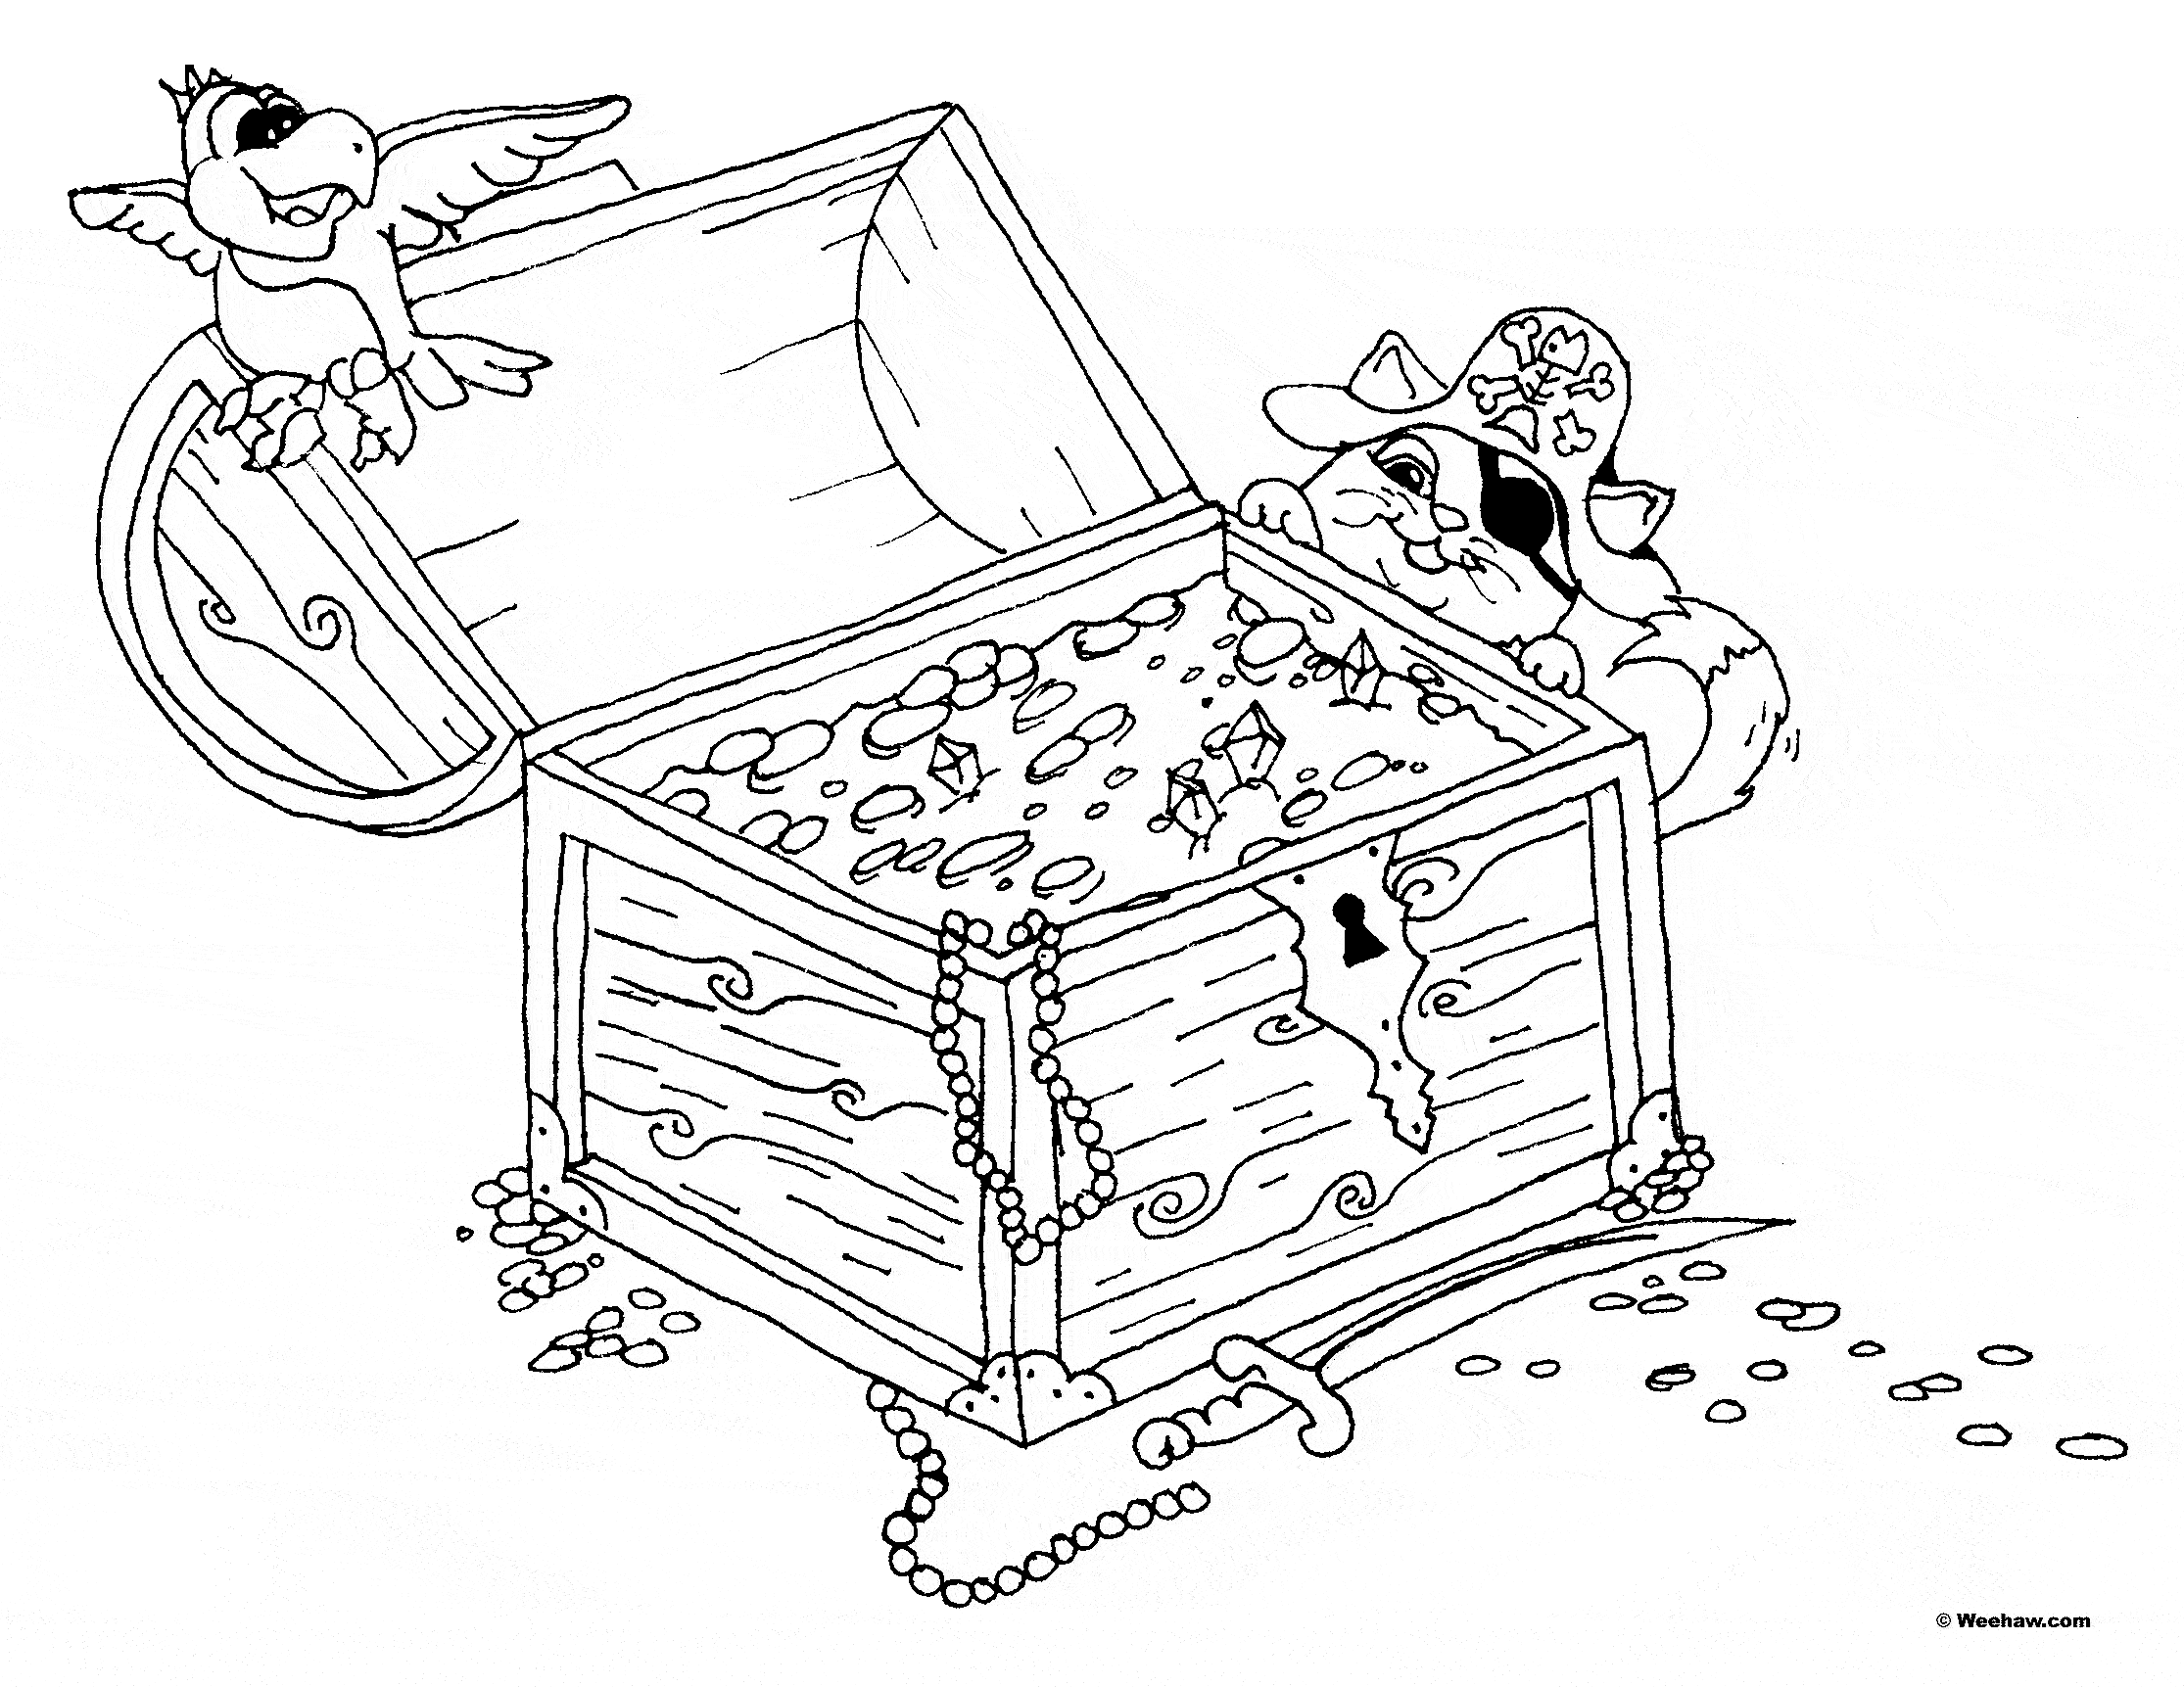 Coloring Pages Of A Sunken Ship - Coloring Home